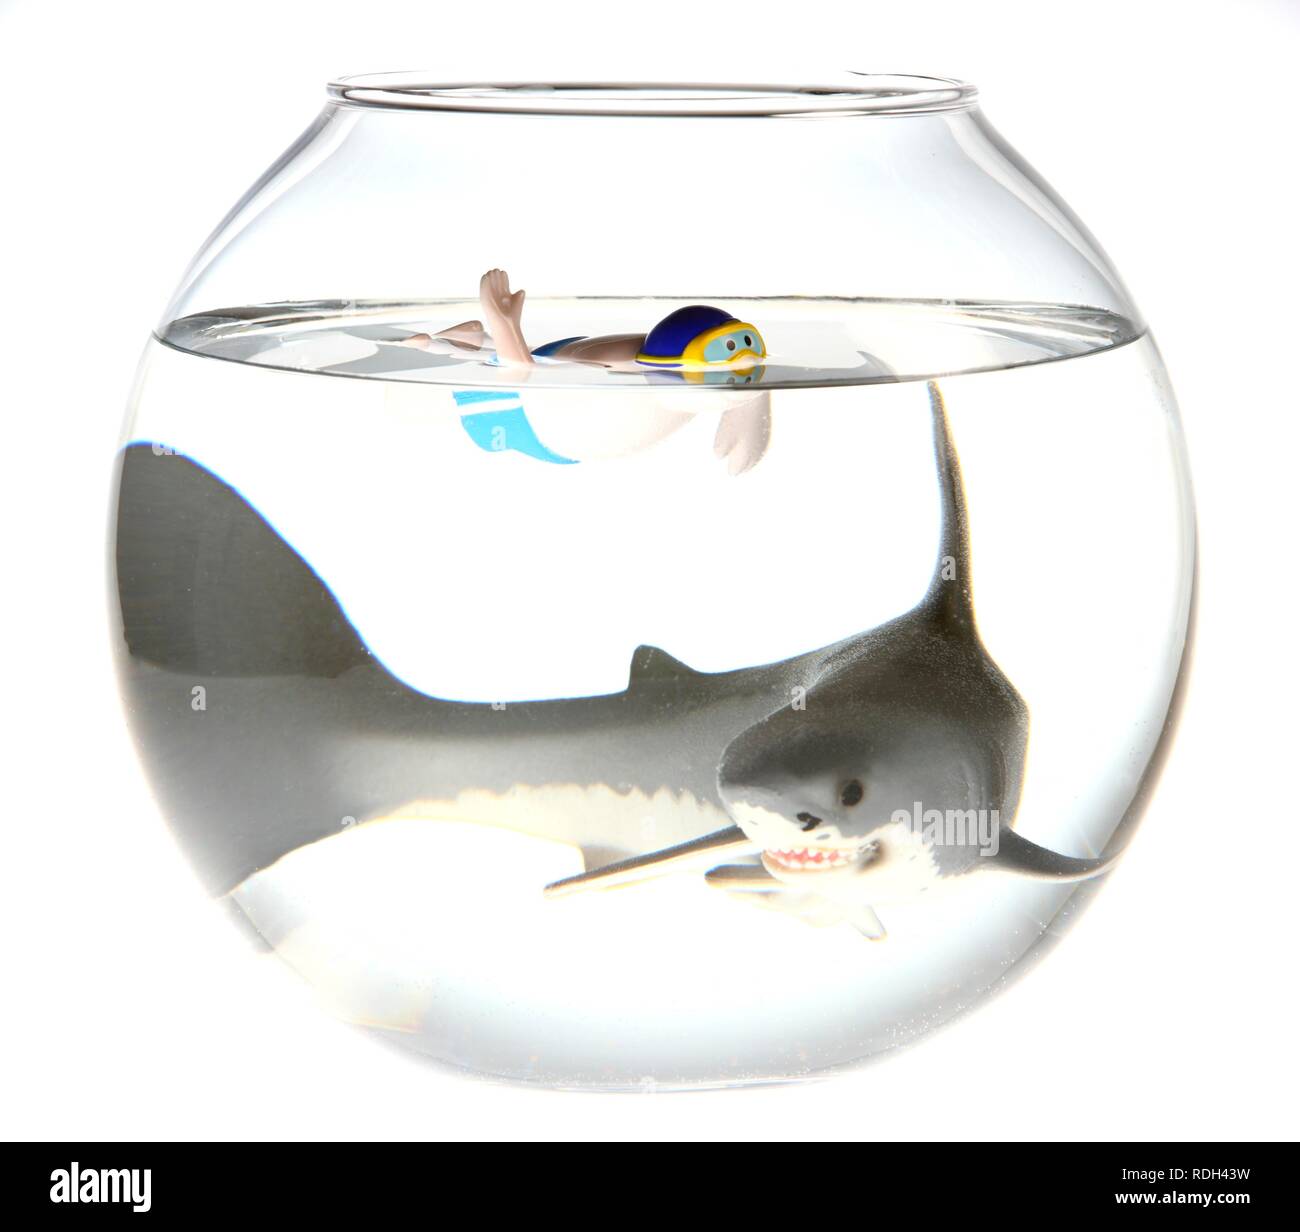 Wind-up toy figure of a boy swimming with a shark in a fish bowl, illustration Stock Photo